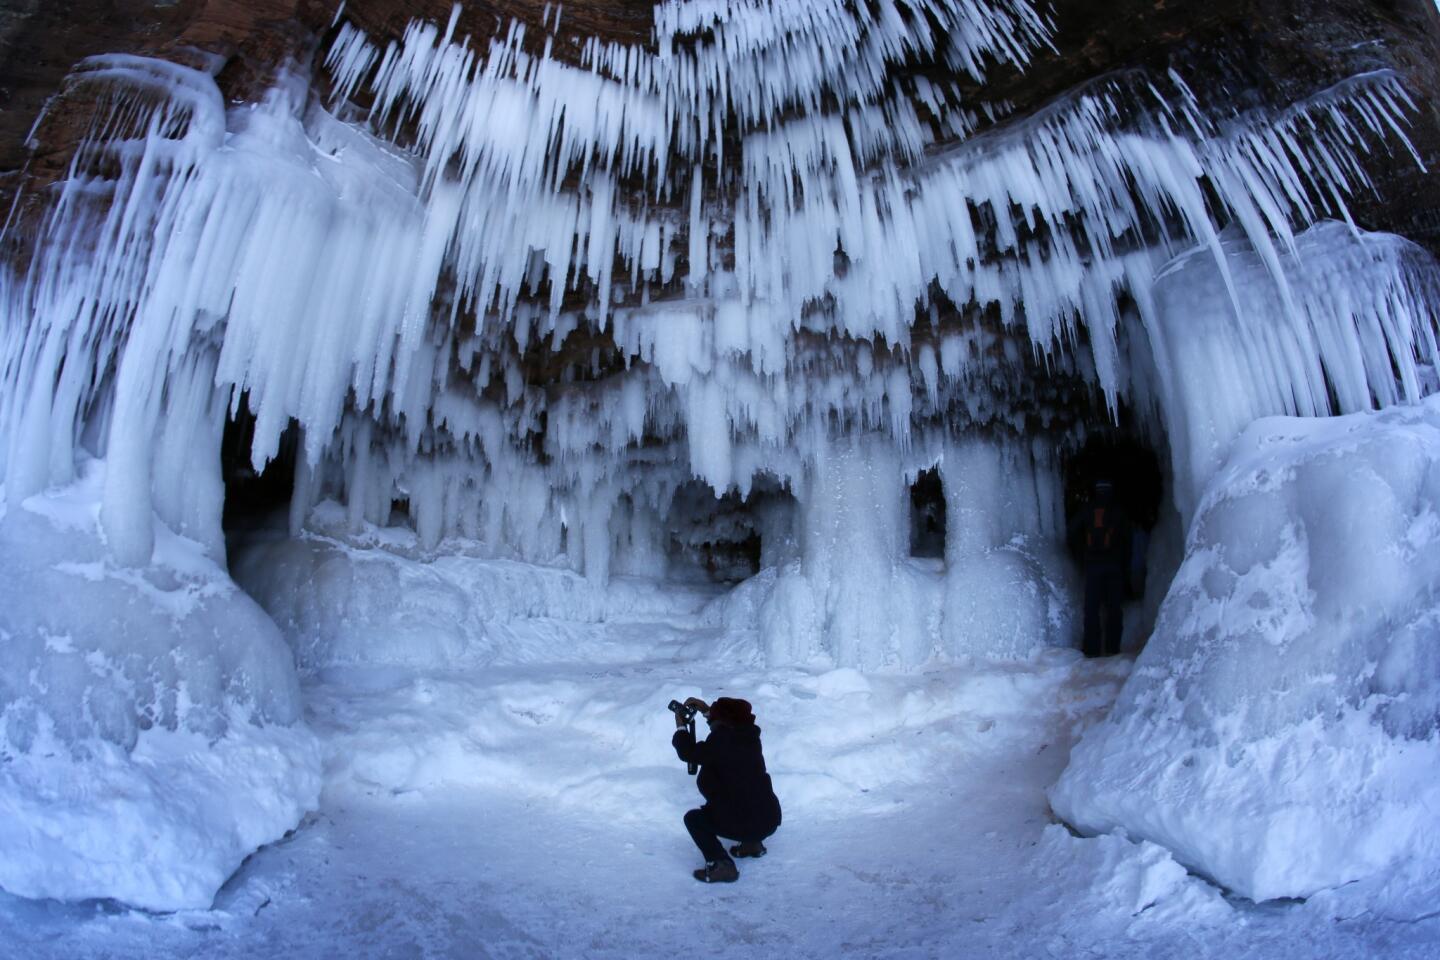 Phogographer at work in ice cave